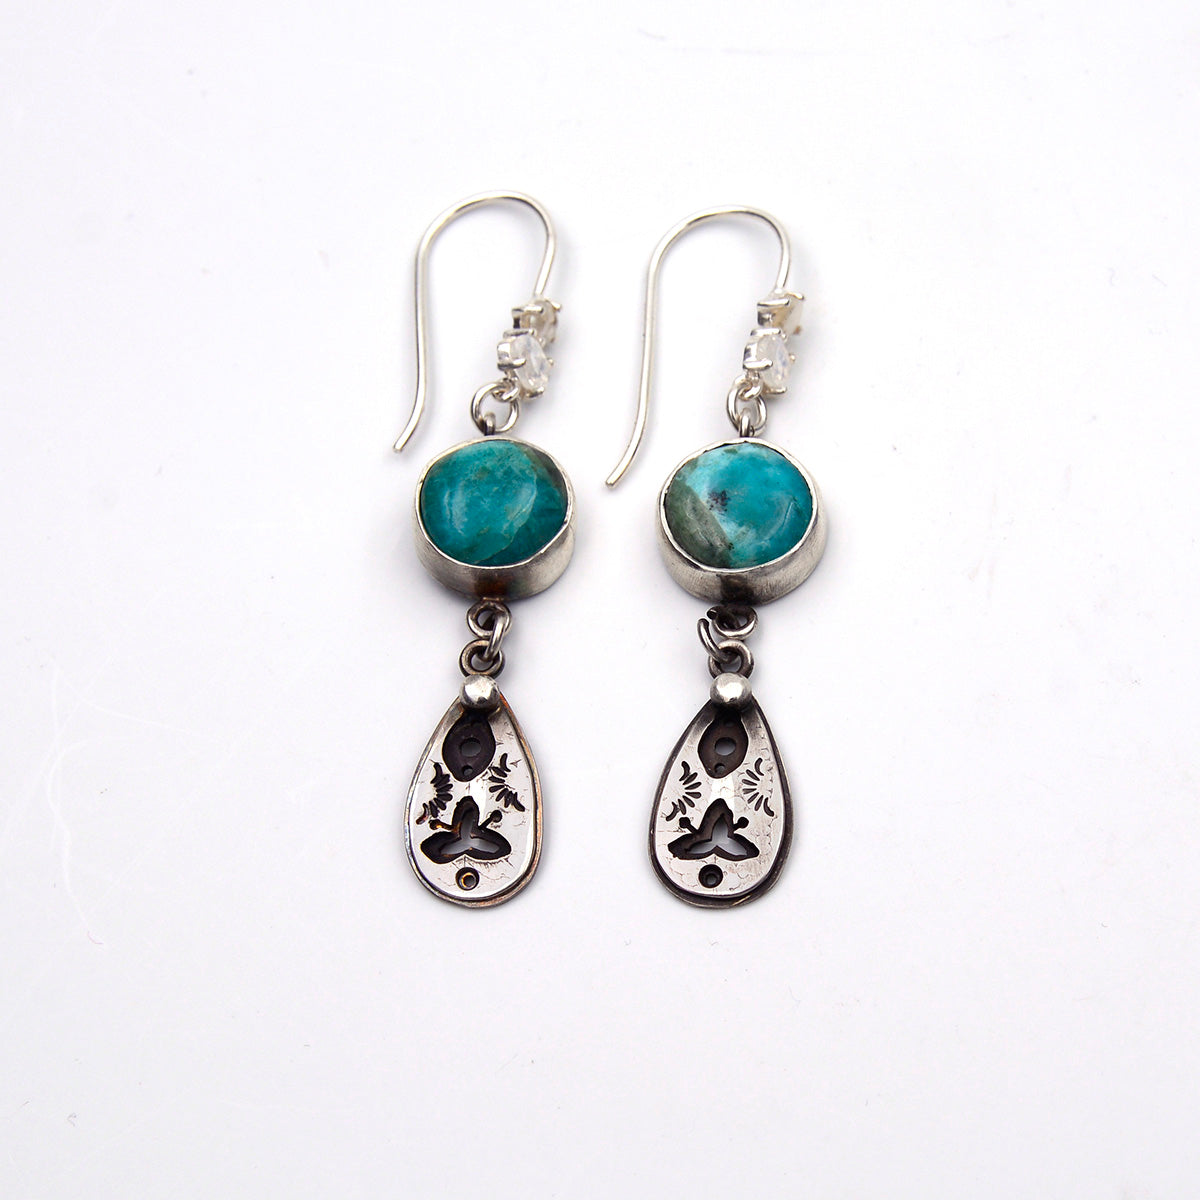 Together - Peruvian Opals & Sterling Silver Earrings - Faith Collection